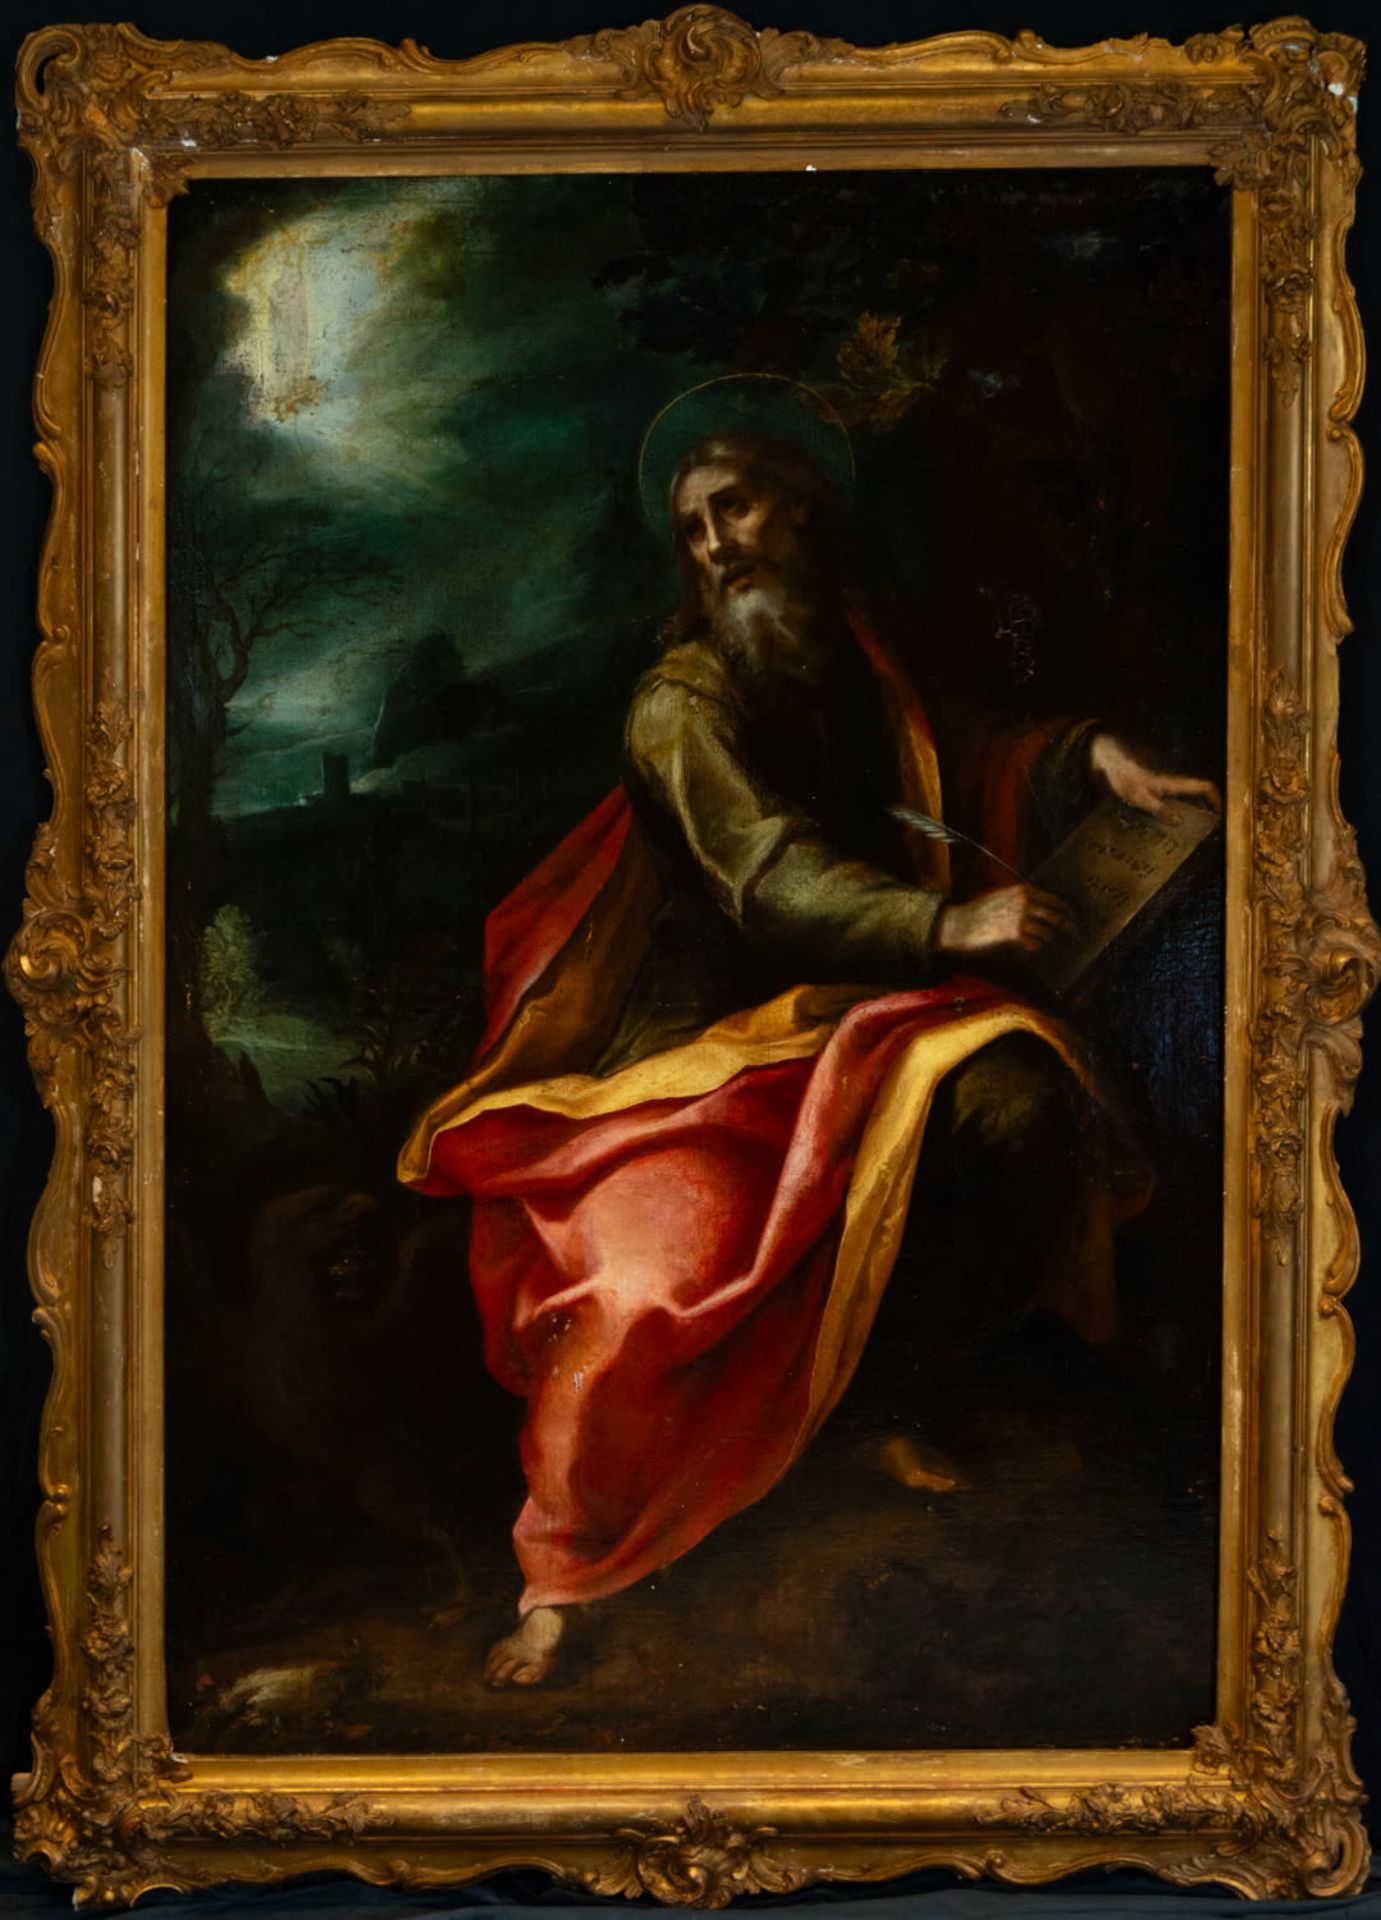 Vision of Patmos by Saint John the Evangelist, Spanish school, 17th century with 19th century frame